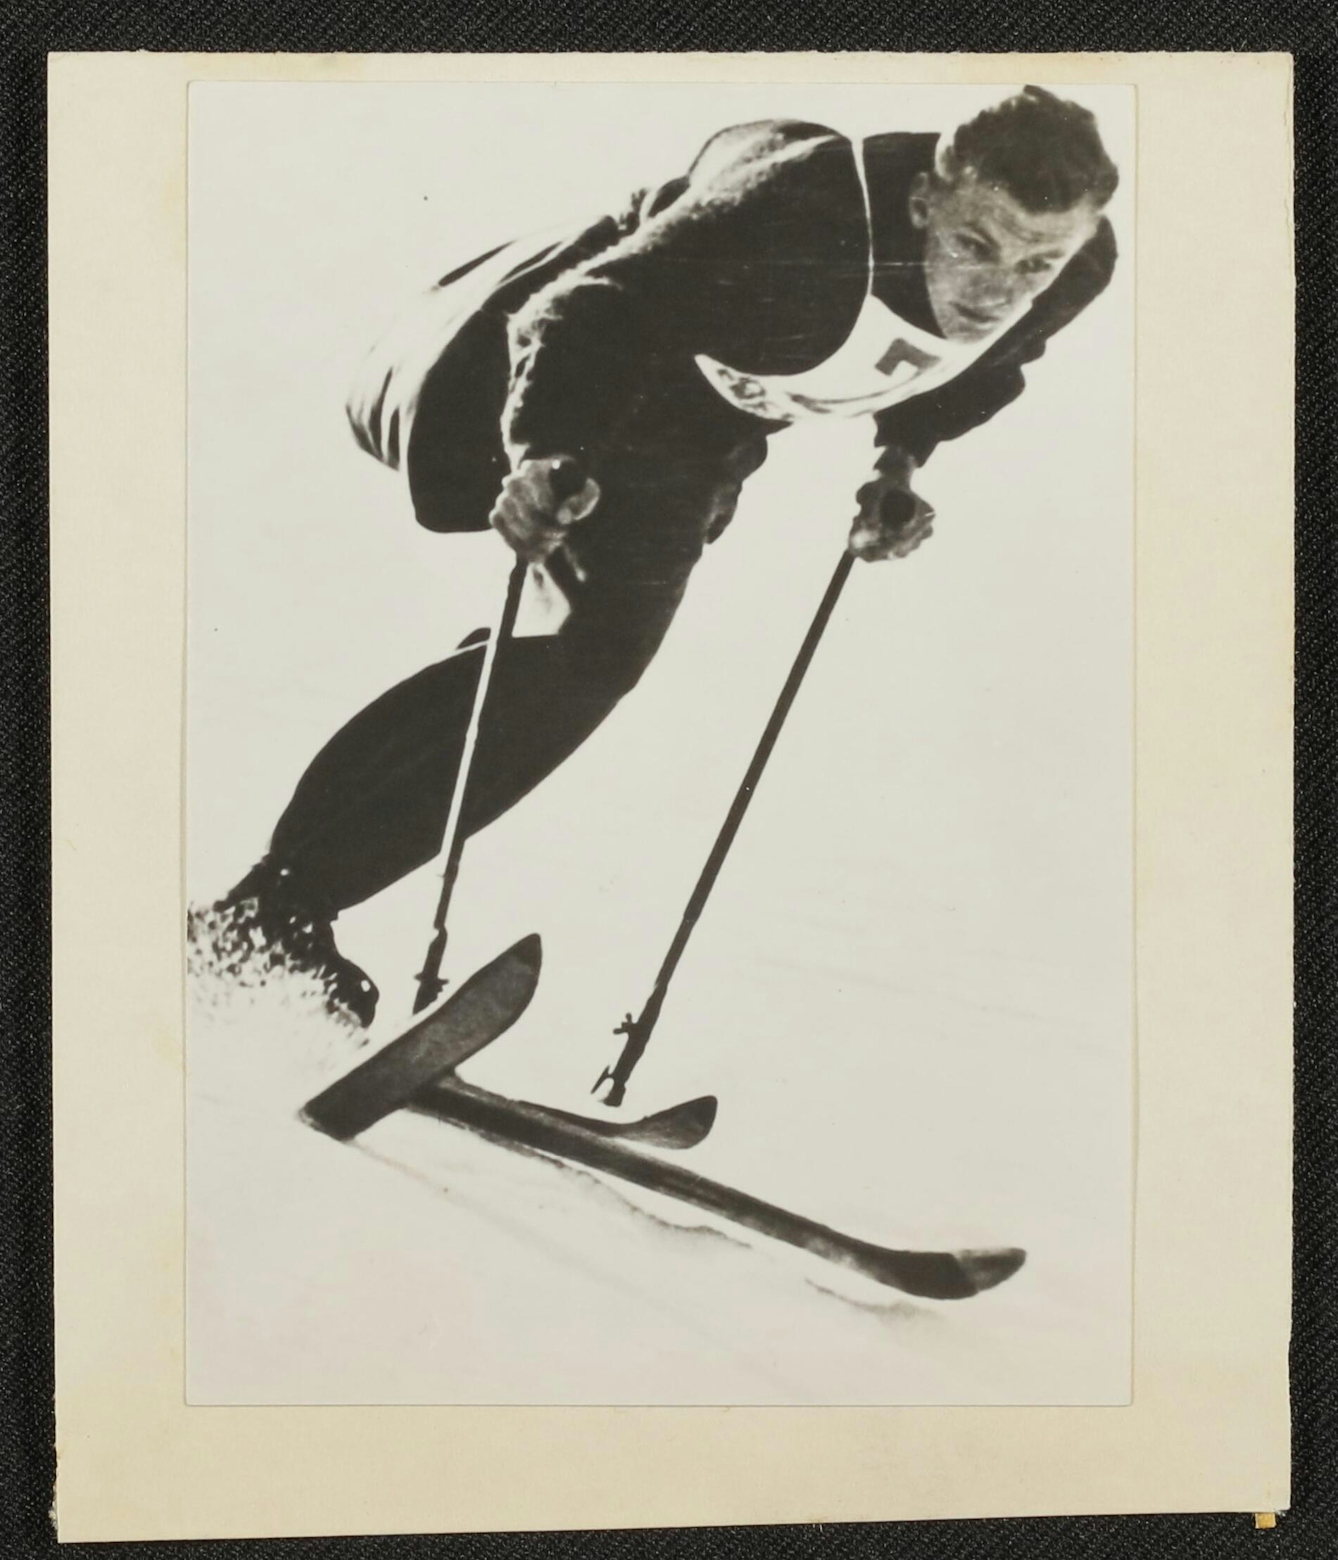 Black and white photographic print of a man skiing. He has one leg and one stump. He leans forward, gripping his poles, and snow sprays up from under his ski, indicating speed. His expression indicates concentration as he gazes off toward the bottom right of the image.